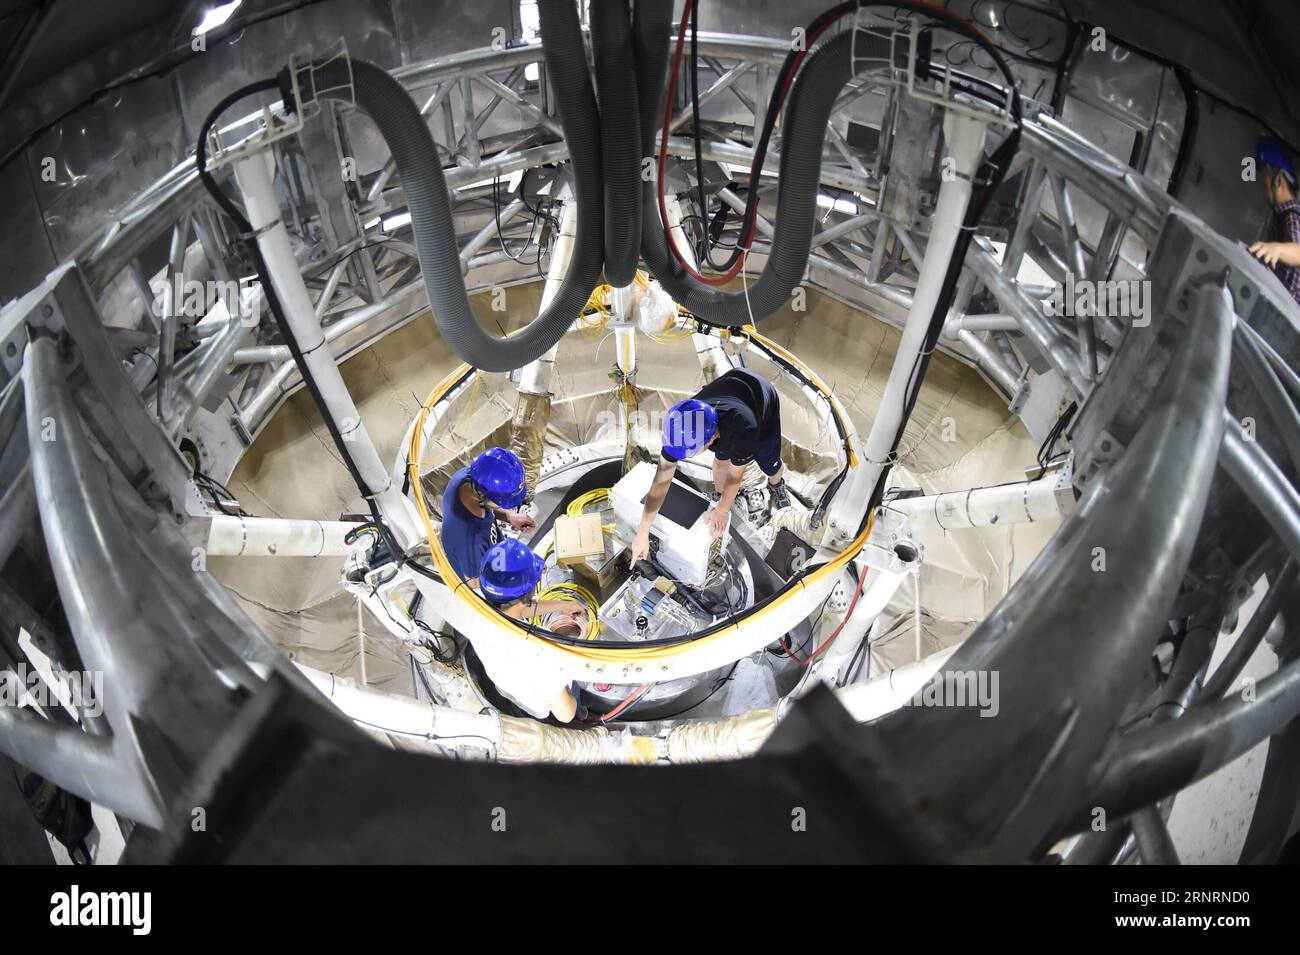 (171010) -- GUIYANG, Oct. 10, 2017 -- Staff members work in the feedback source cabin of the Five-hundred-meter Aperture Spherical Telescope (FAST) in Pingtang County, southwest China s Guizhou Province, Aug. 10, 2017. The China-based FAST, the world s largest single-dish radio telescope, has identified two pulsars after one year of trial operation, the National Astronomical Observatories of China (NAOC) said on Oct. 10, 2017. ) (ry) CHINA-FAST TELESCOPE-PULSARS (CN) OuxDongqu PUBLICATIONxNOTxINxCHN Stock Photo